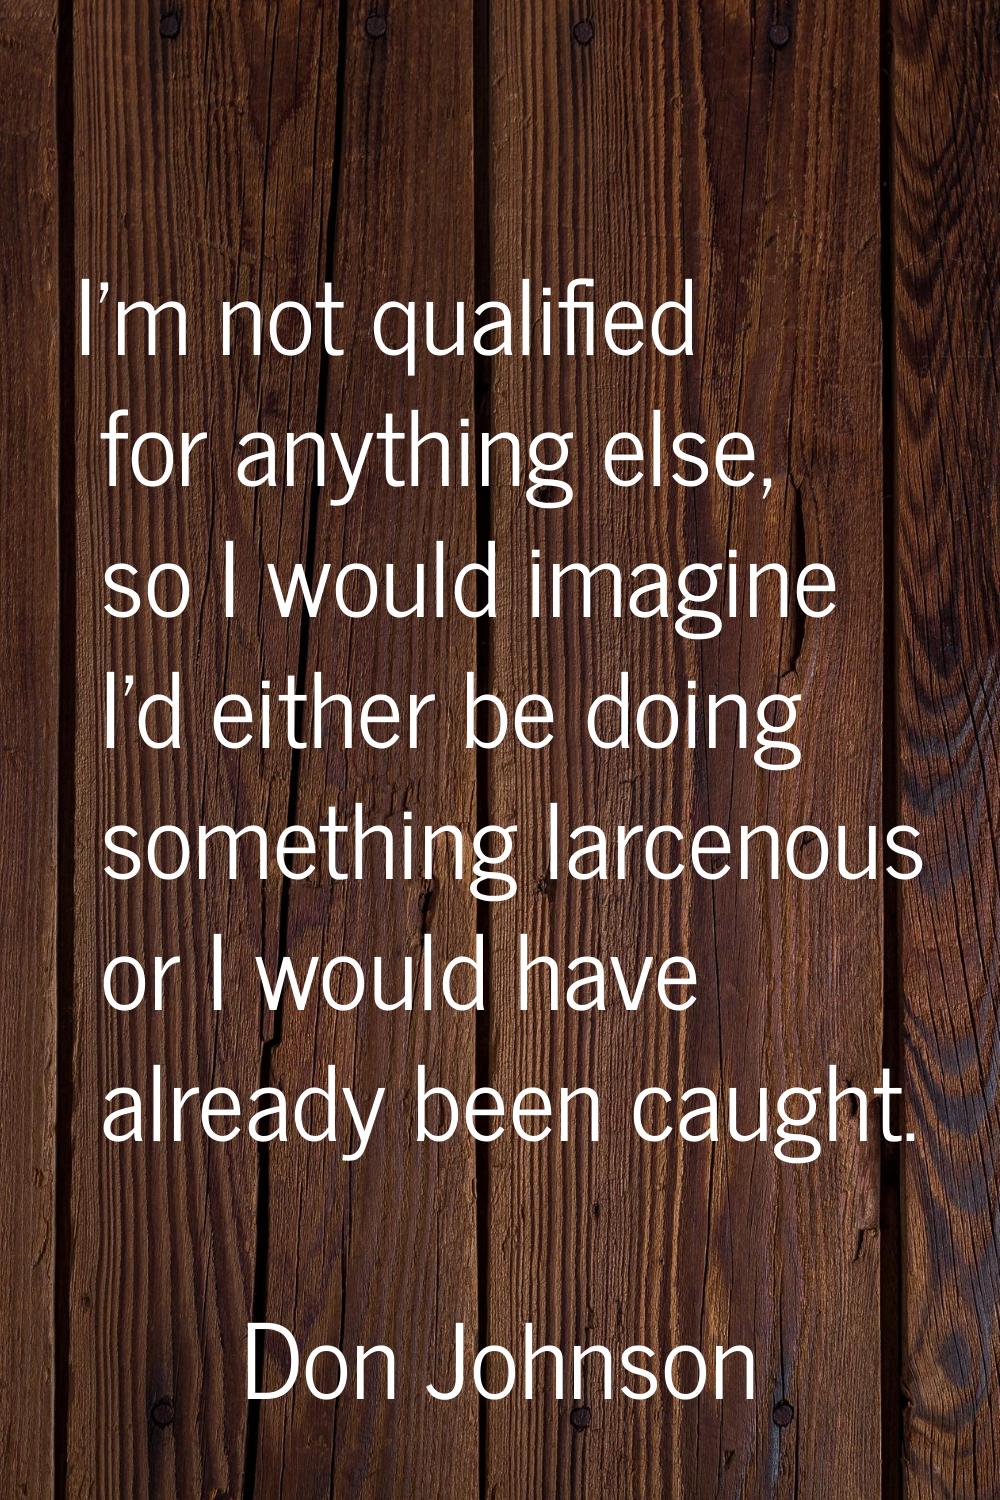 I'm not qualified for anything else, so I would imagine I'd either be doing something larcenous or 